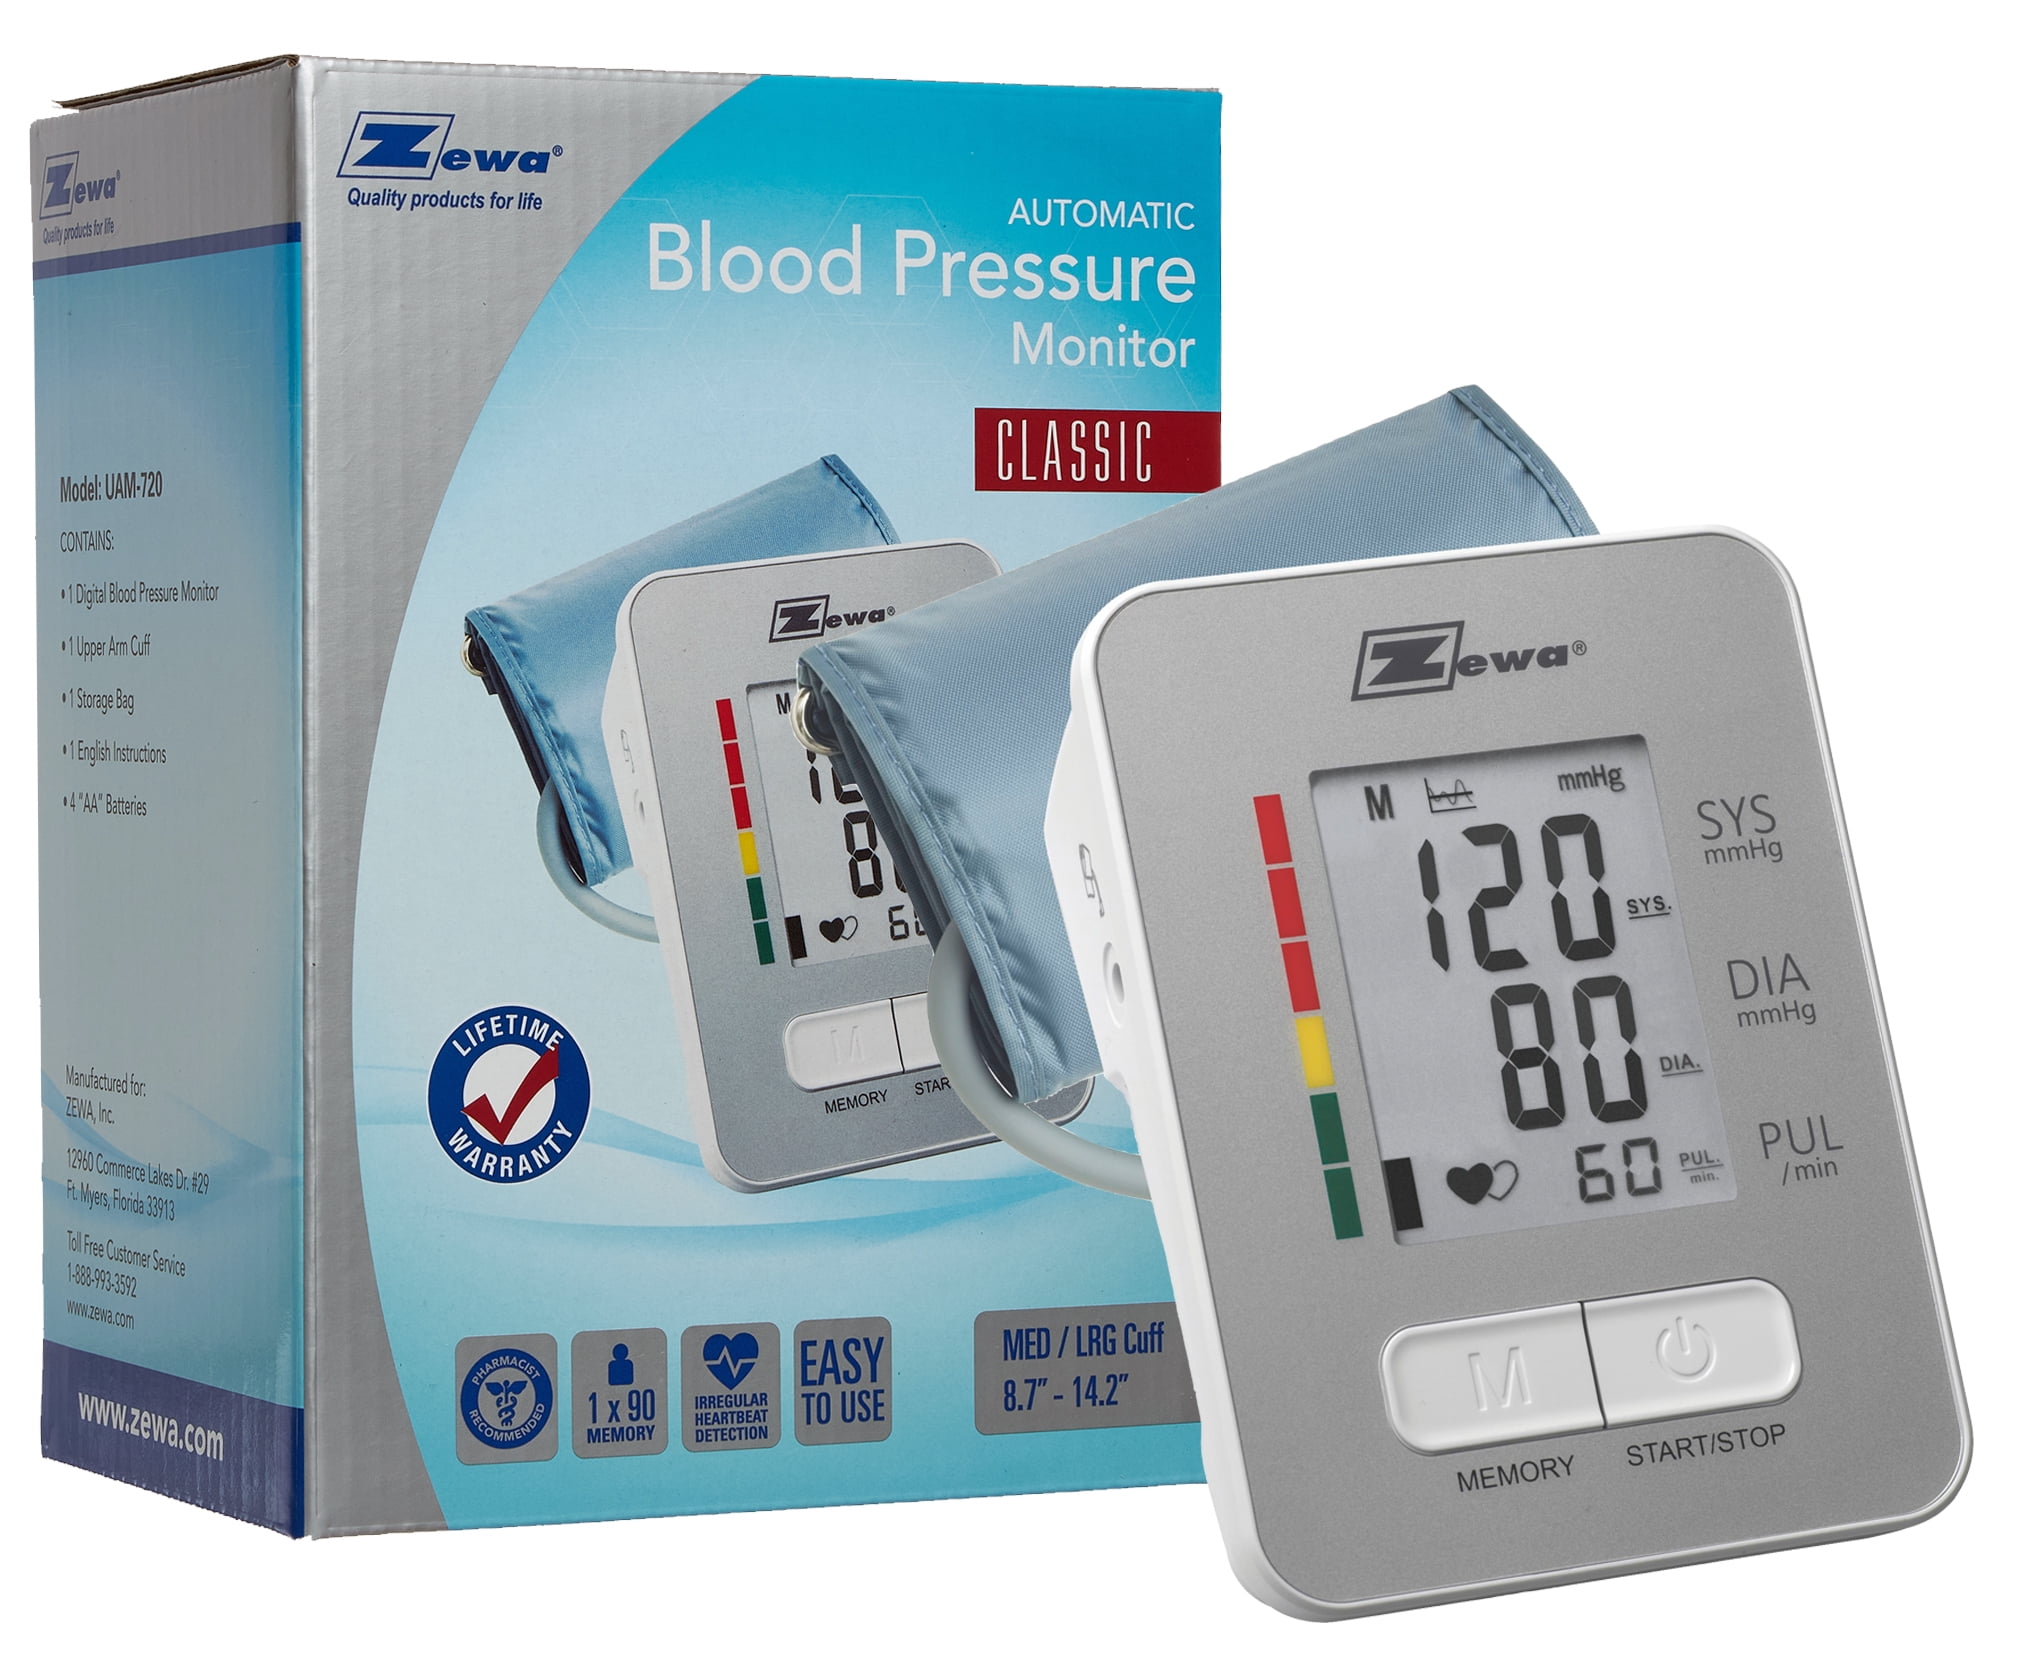 Equate BP-6500 Wrist Blood Pressure Monitor with Bluetooth